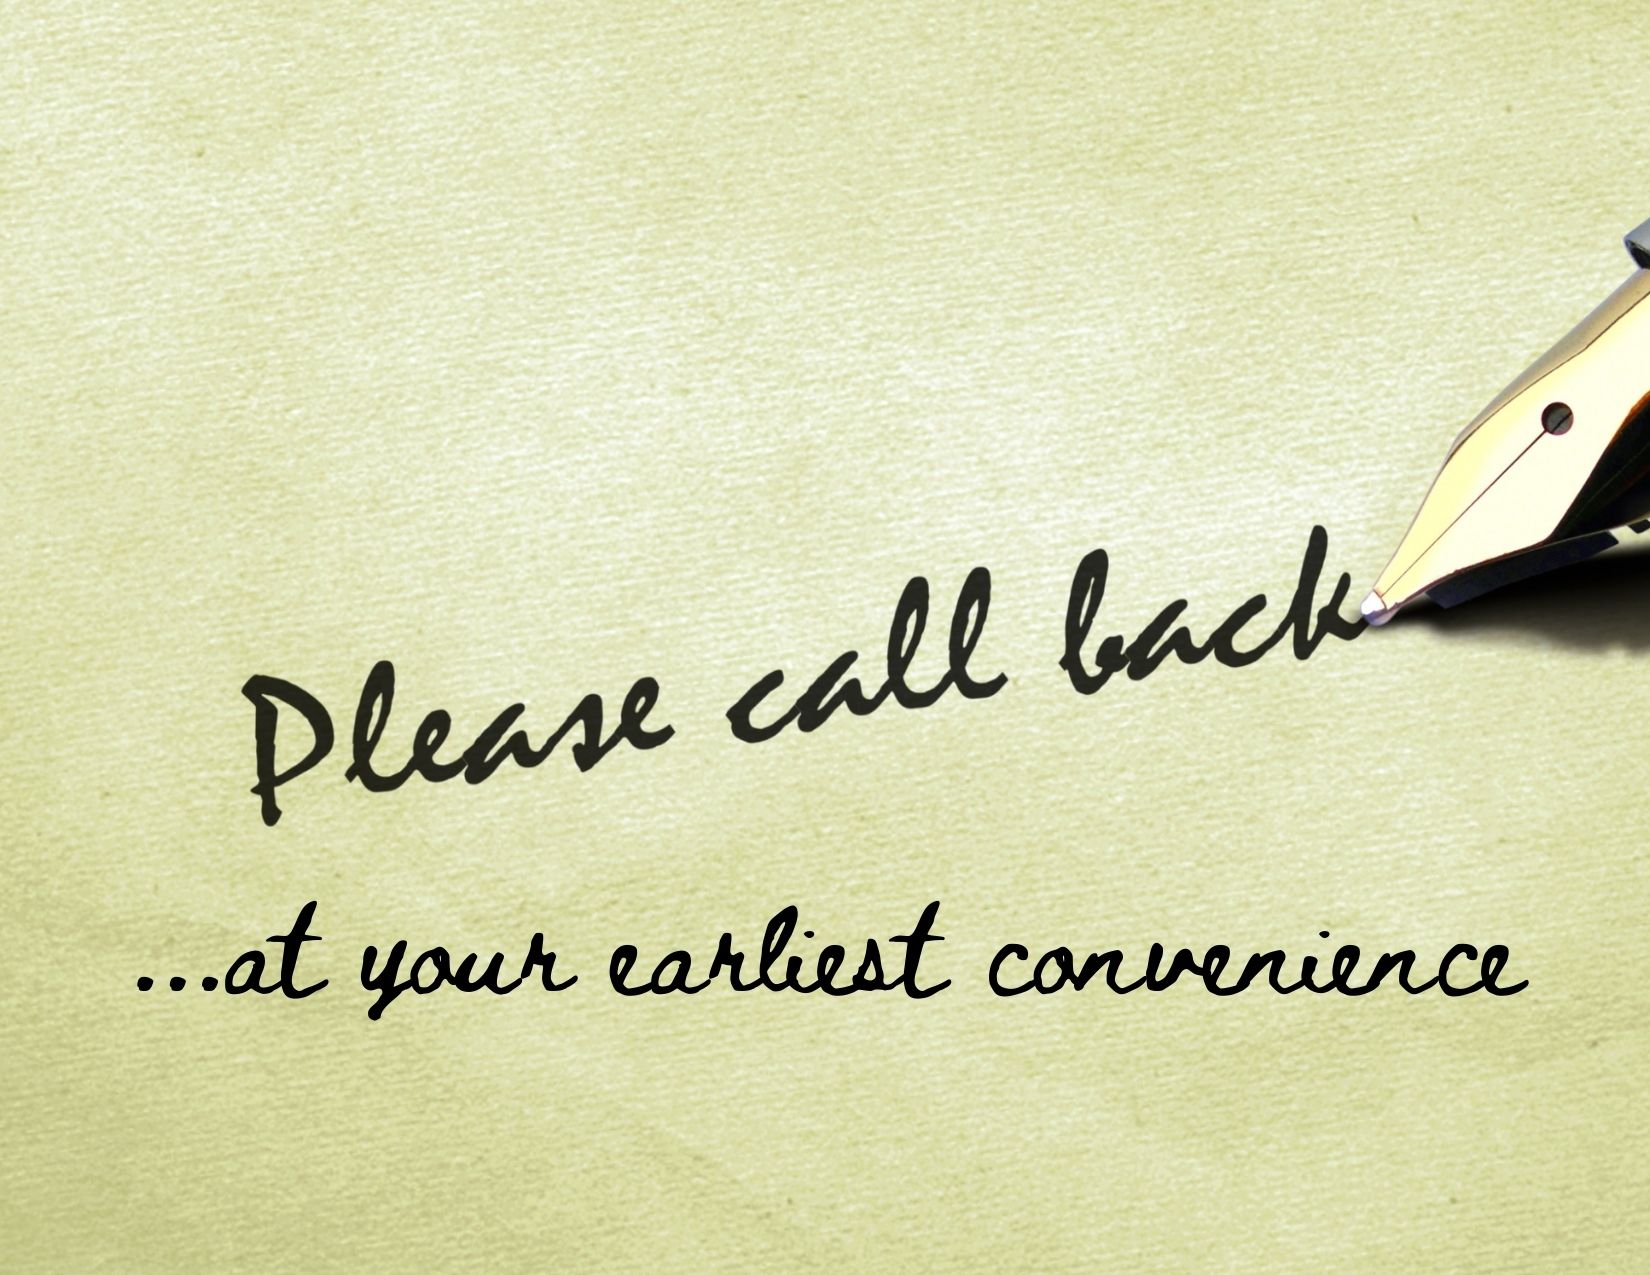 A handwritten notes with the words "Please call back ... at your earliest convenience